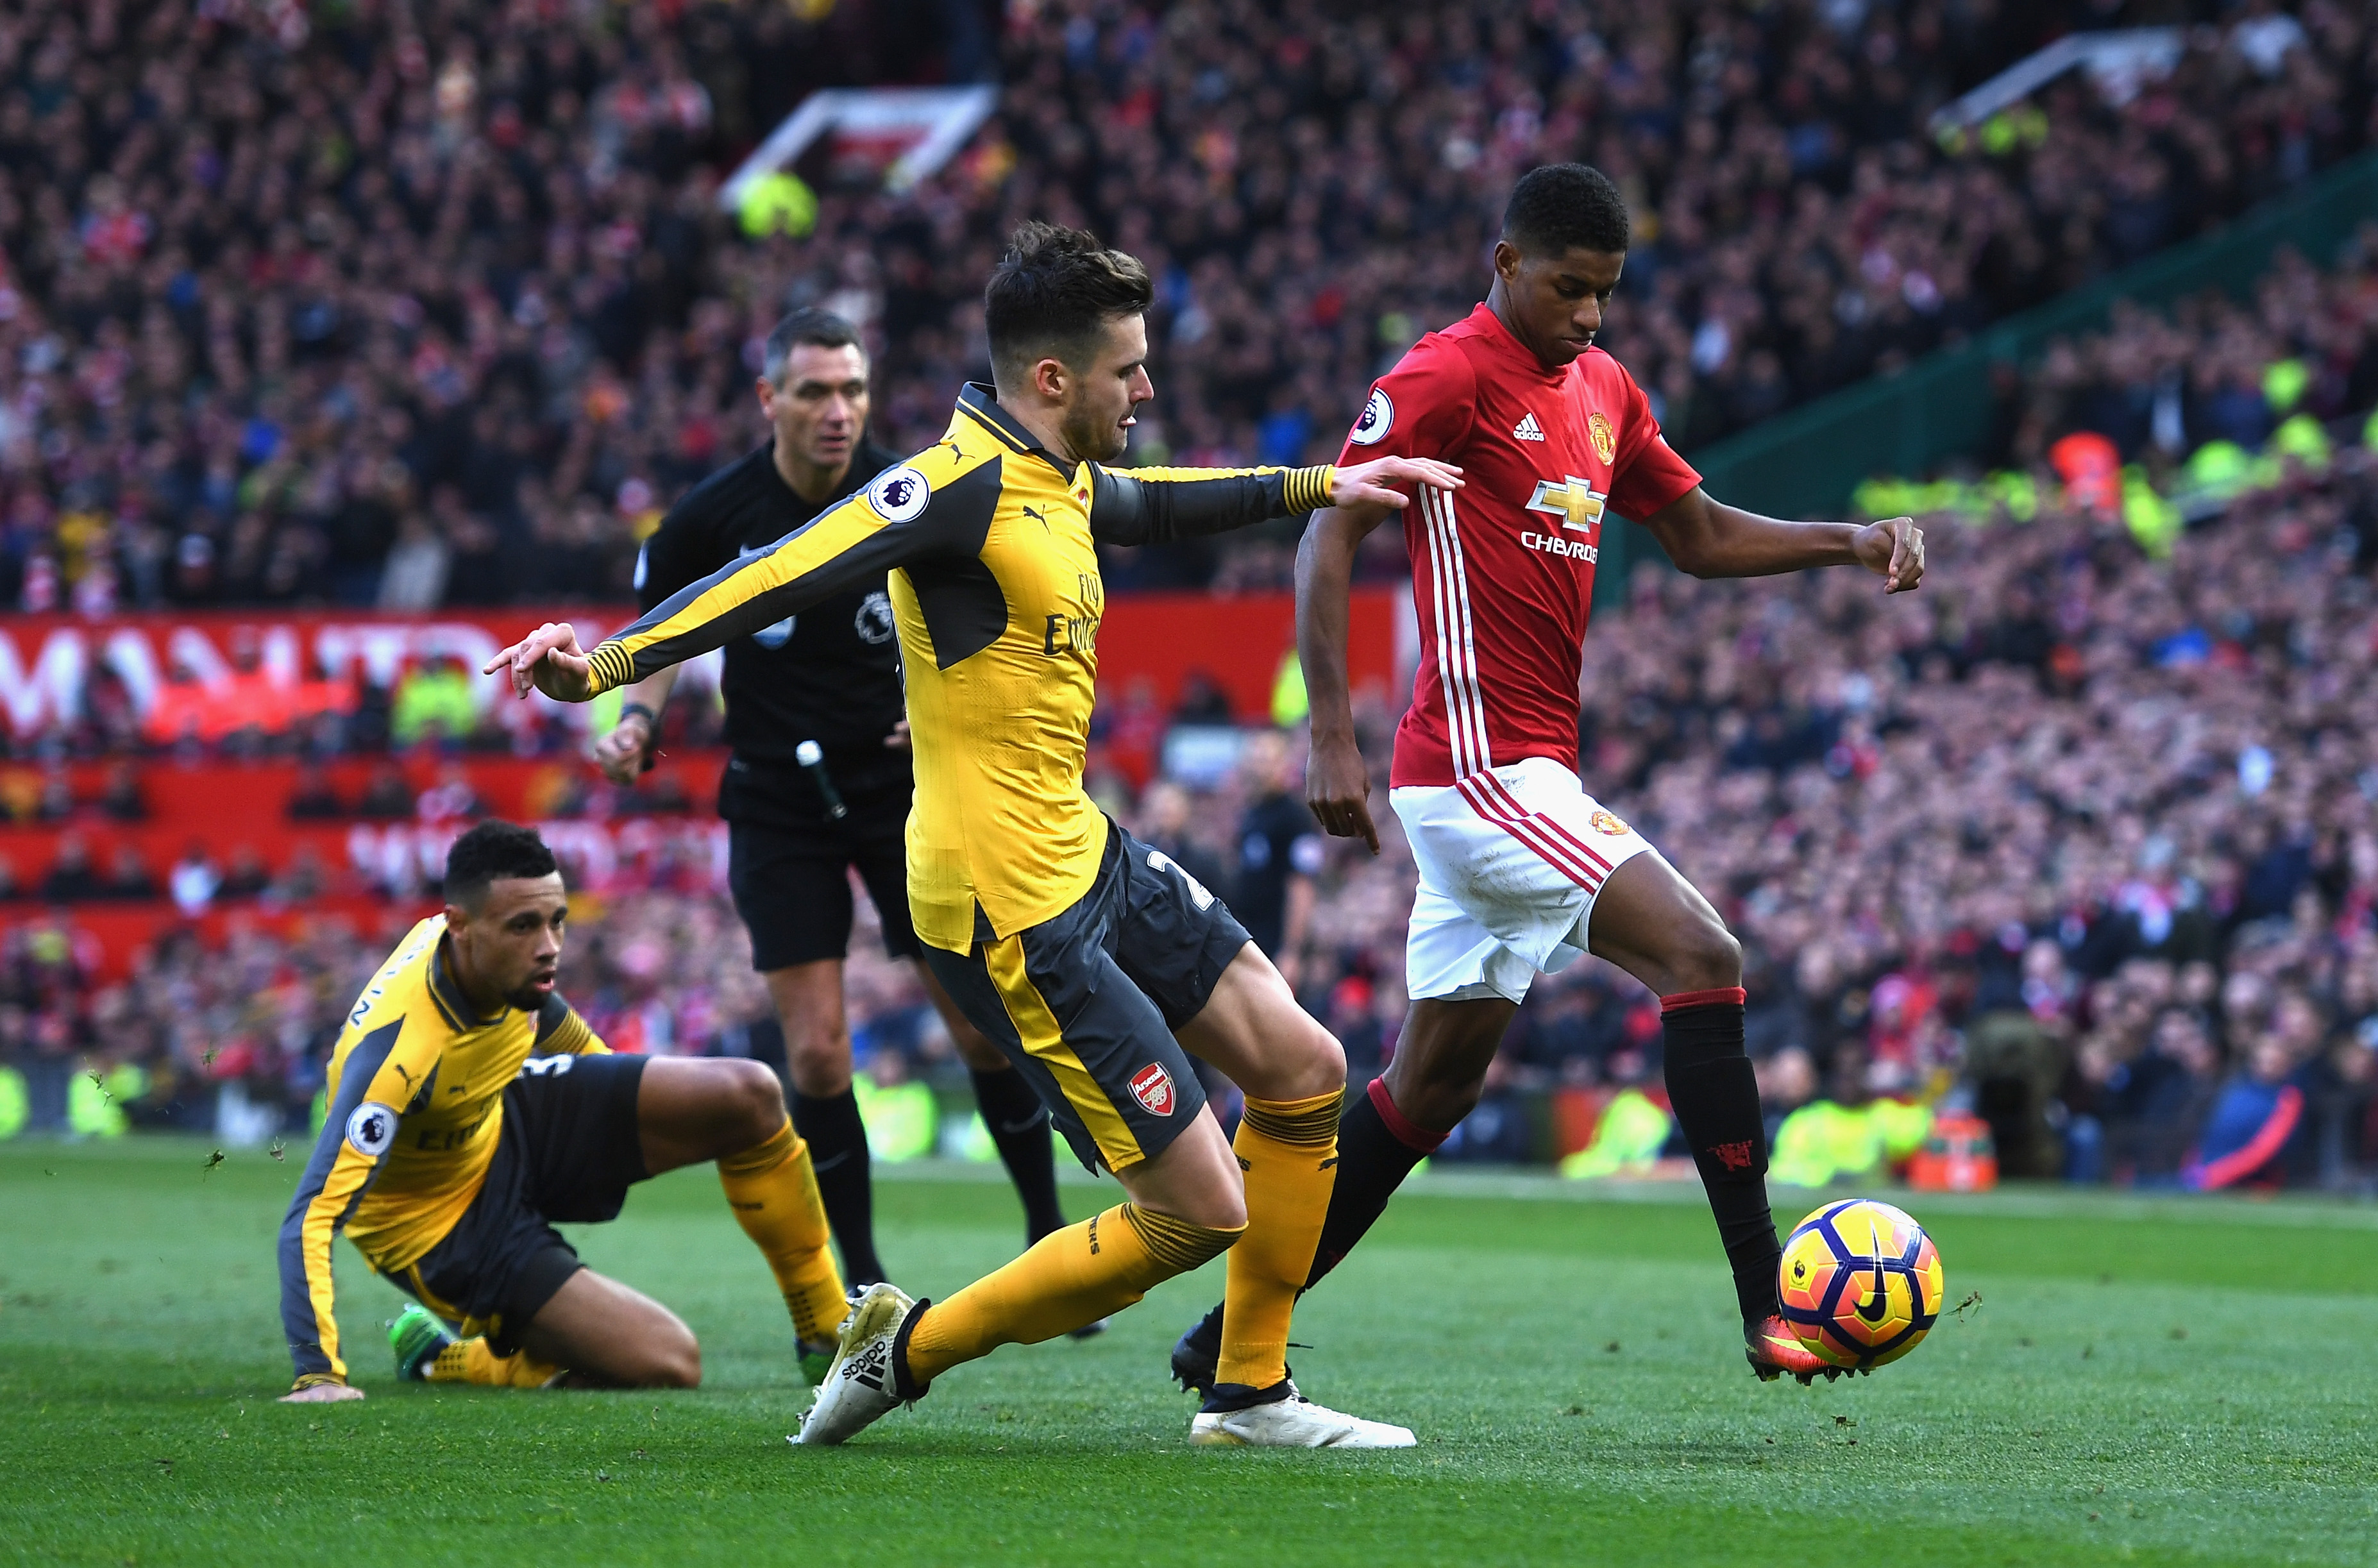 Arsenal vs. Manchester United: Highlights and recap